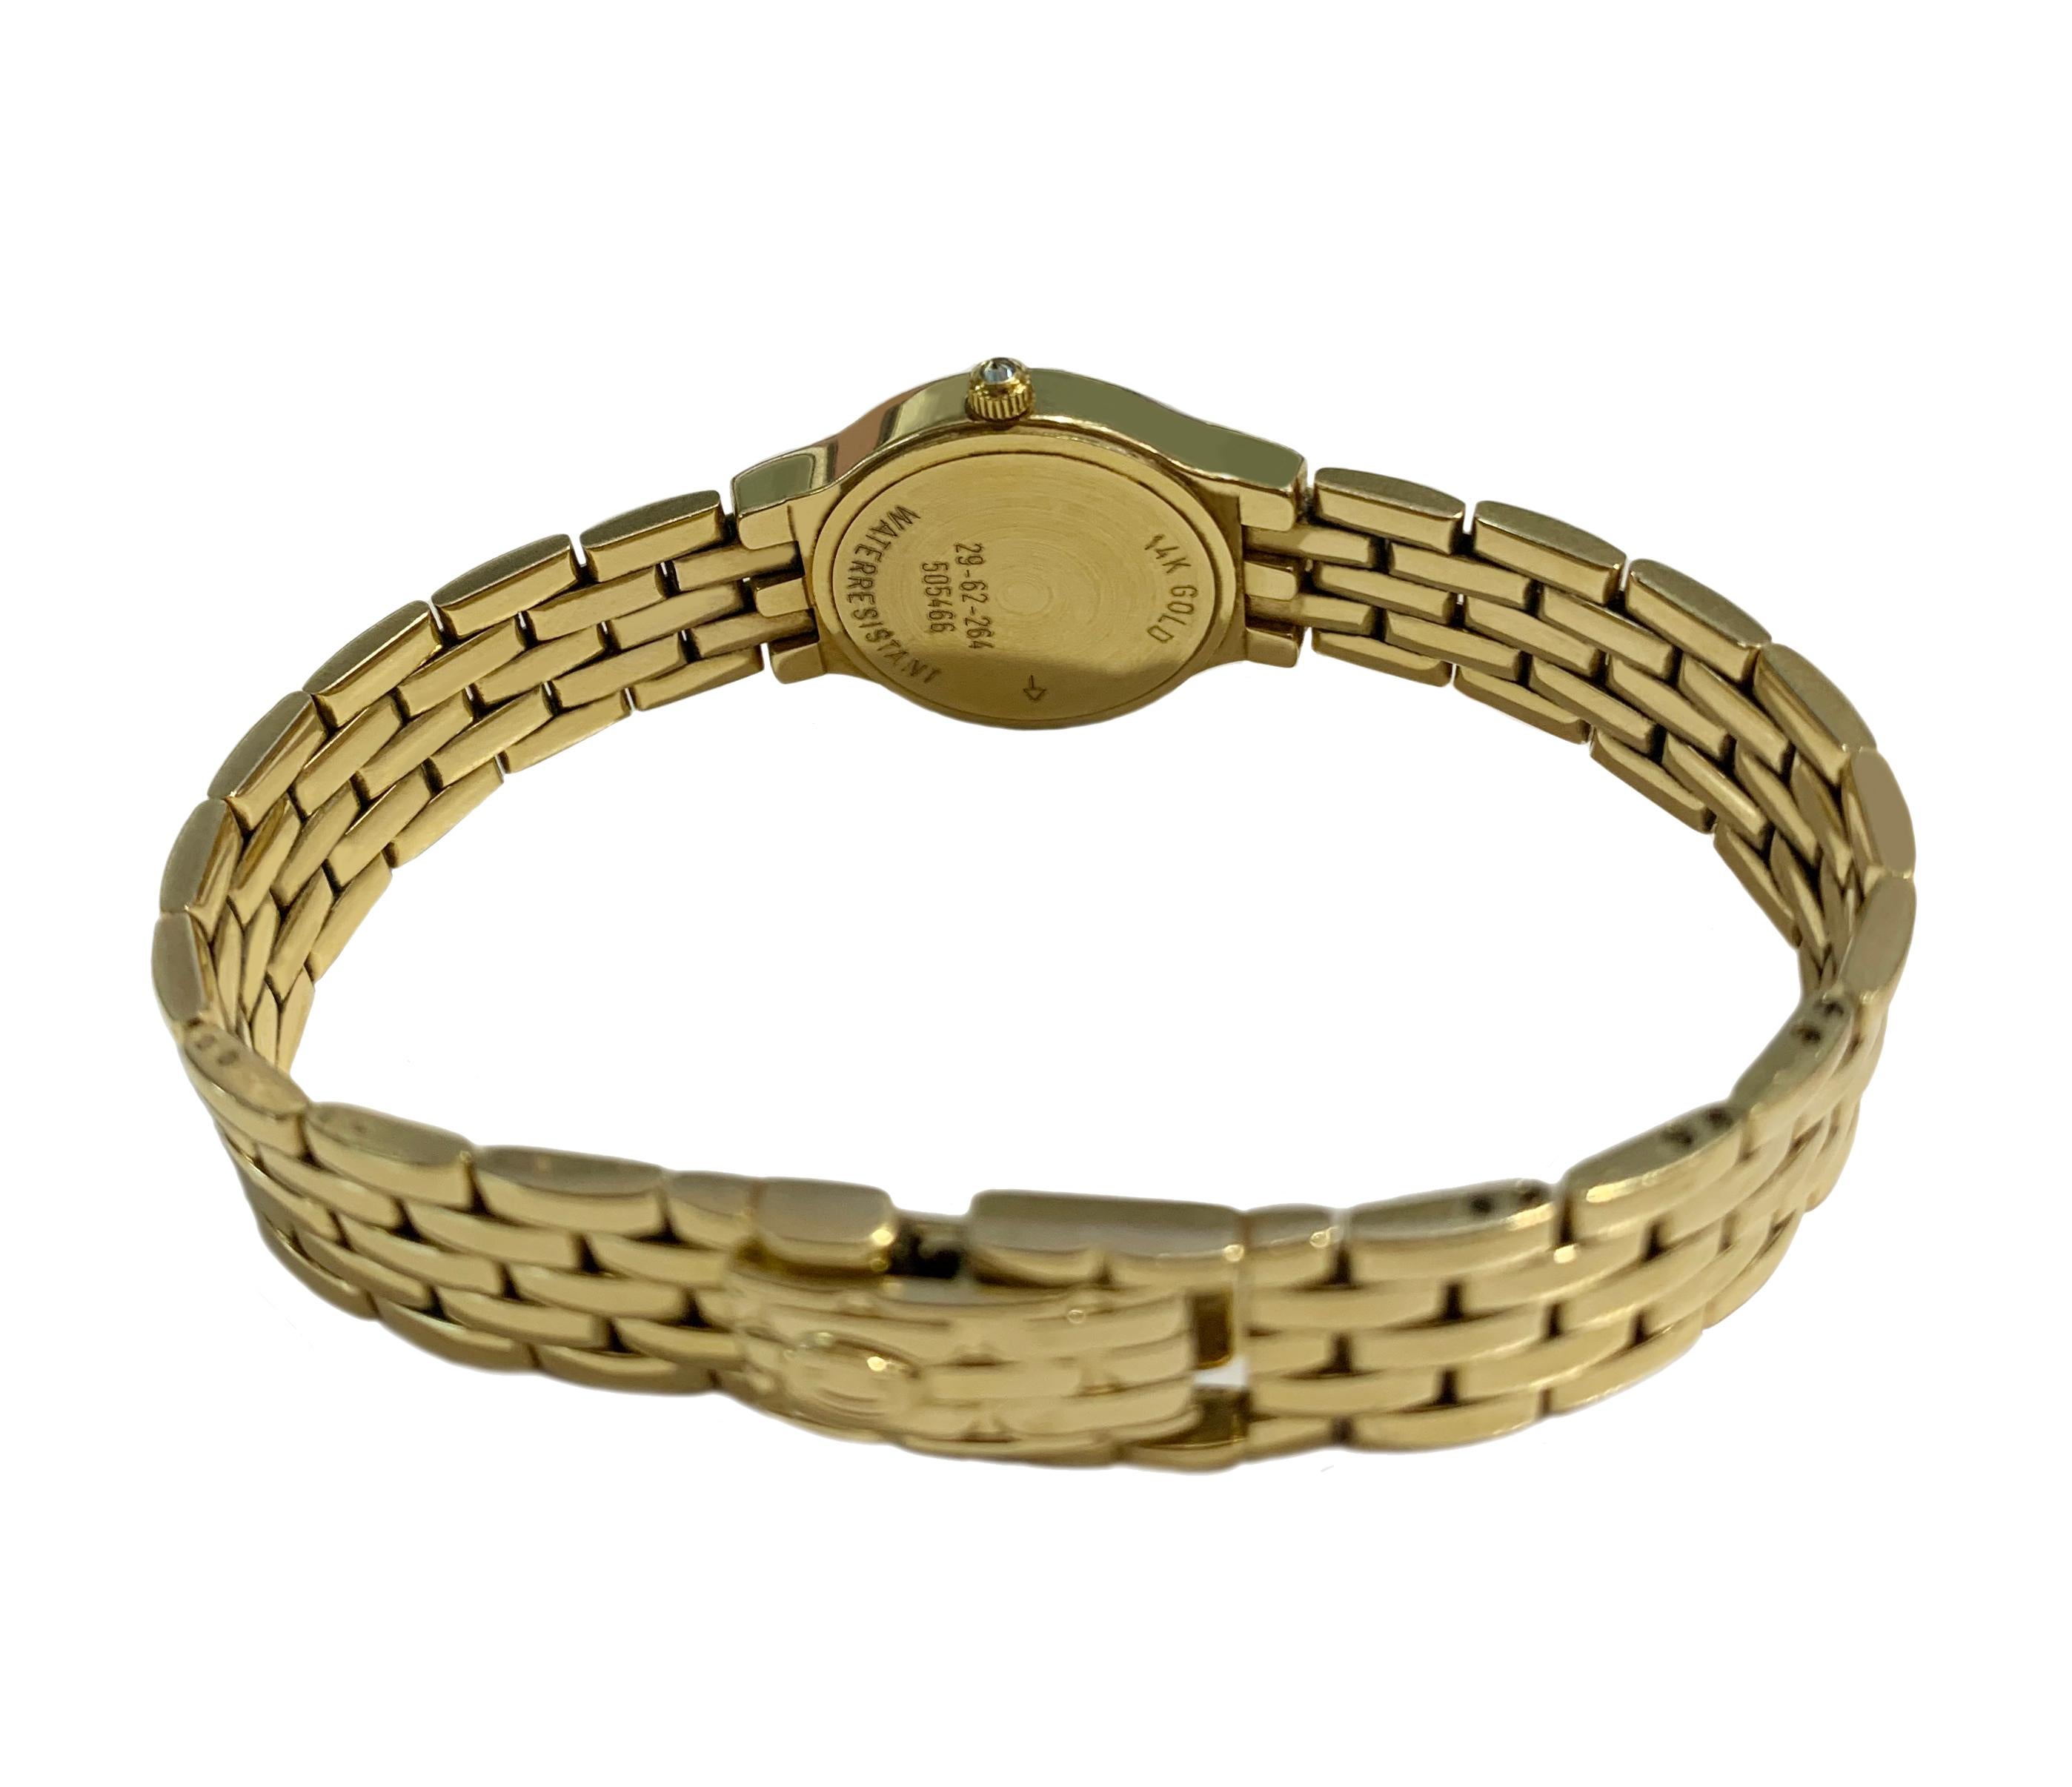 Concord Contemporary in Yellow Gold MOP Watch 29-62-264 Excellent état - En vente à New York, NY